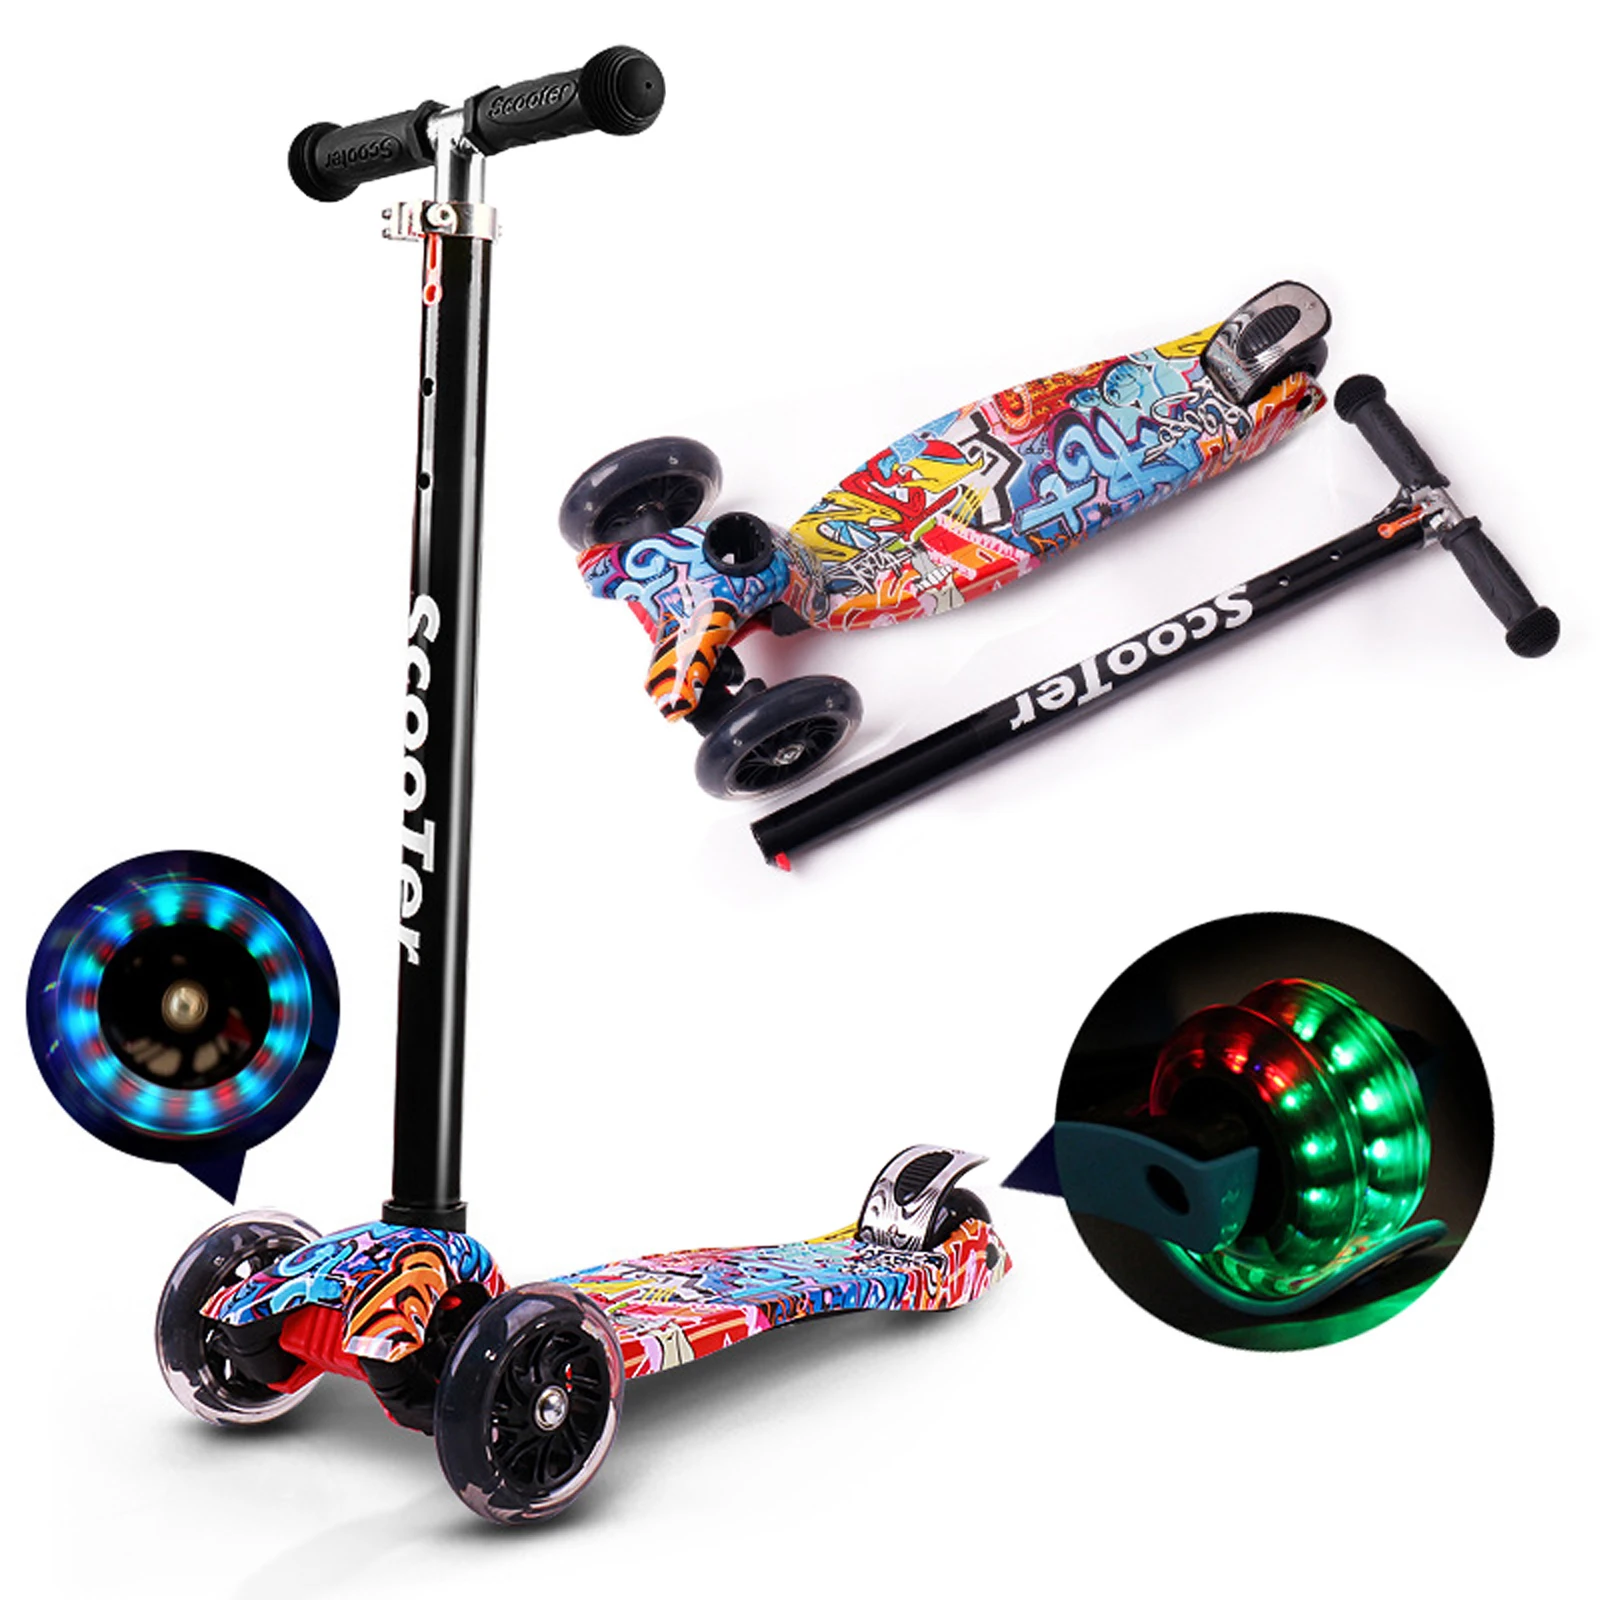 Details about   Caroma Folding Kick Scooter for Kids,3 Adjustable Height,3 Flashing Wheels Kids 